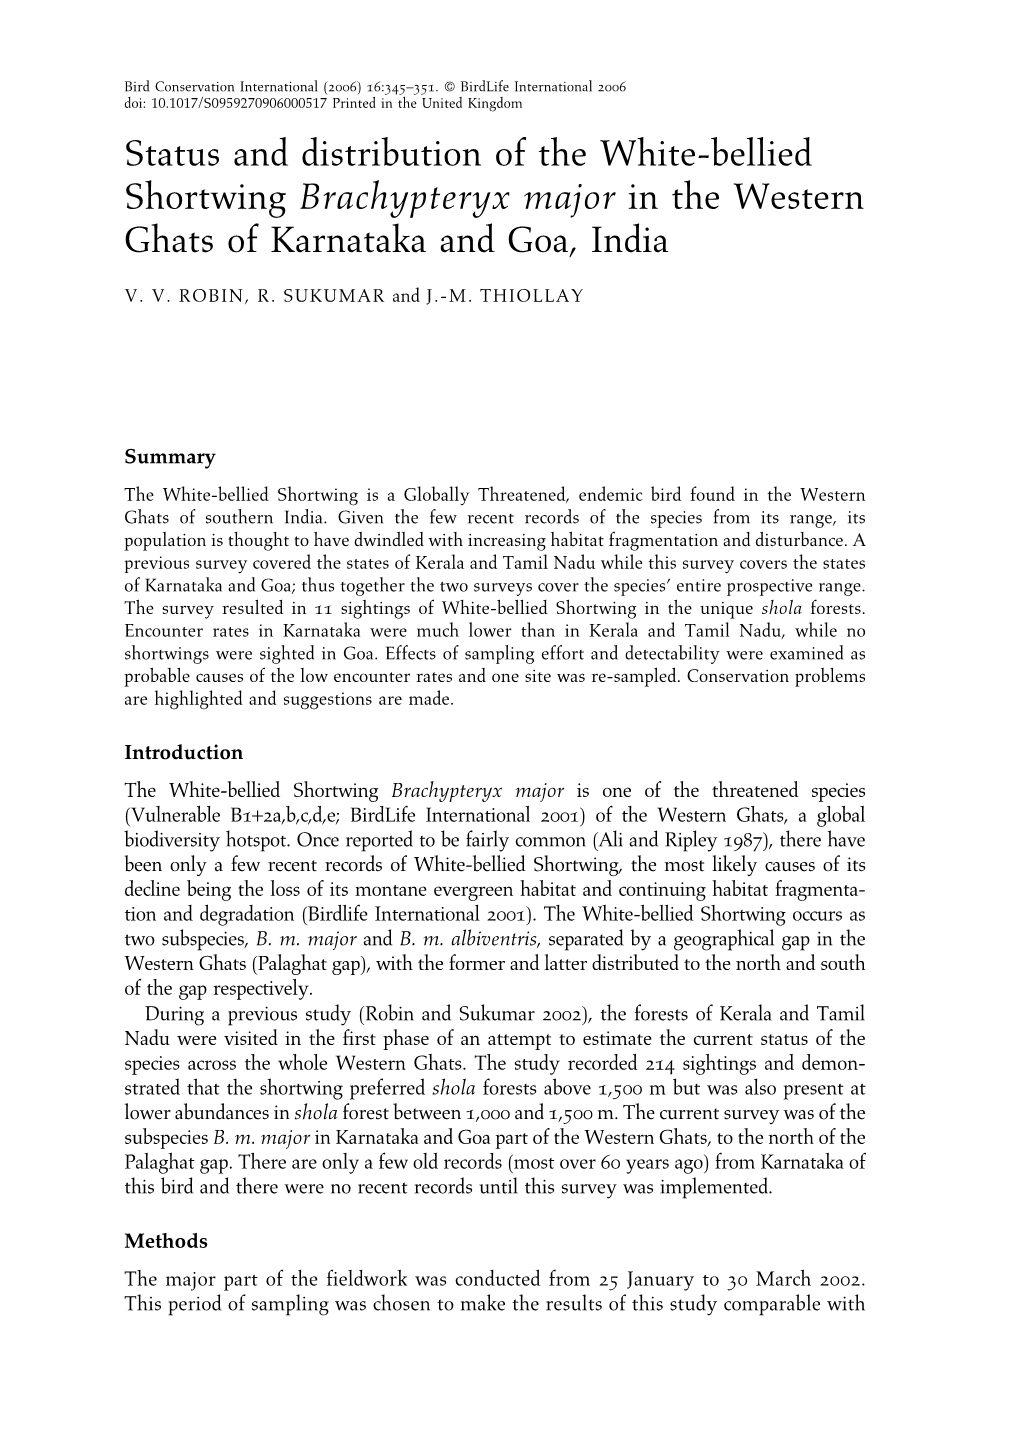 Status and Distribution of the White-Bellied Shortwing Brachypteryx Major in the Western Ghats of Karnataka and Goa, India